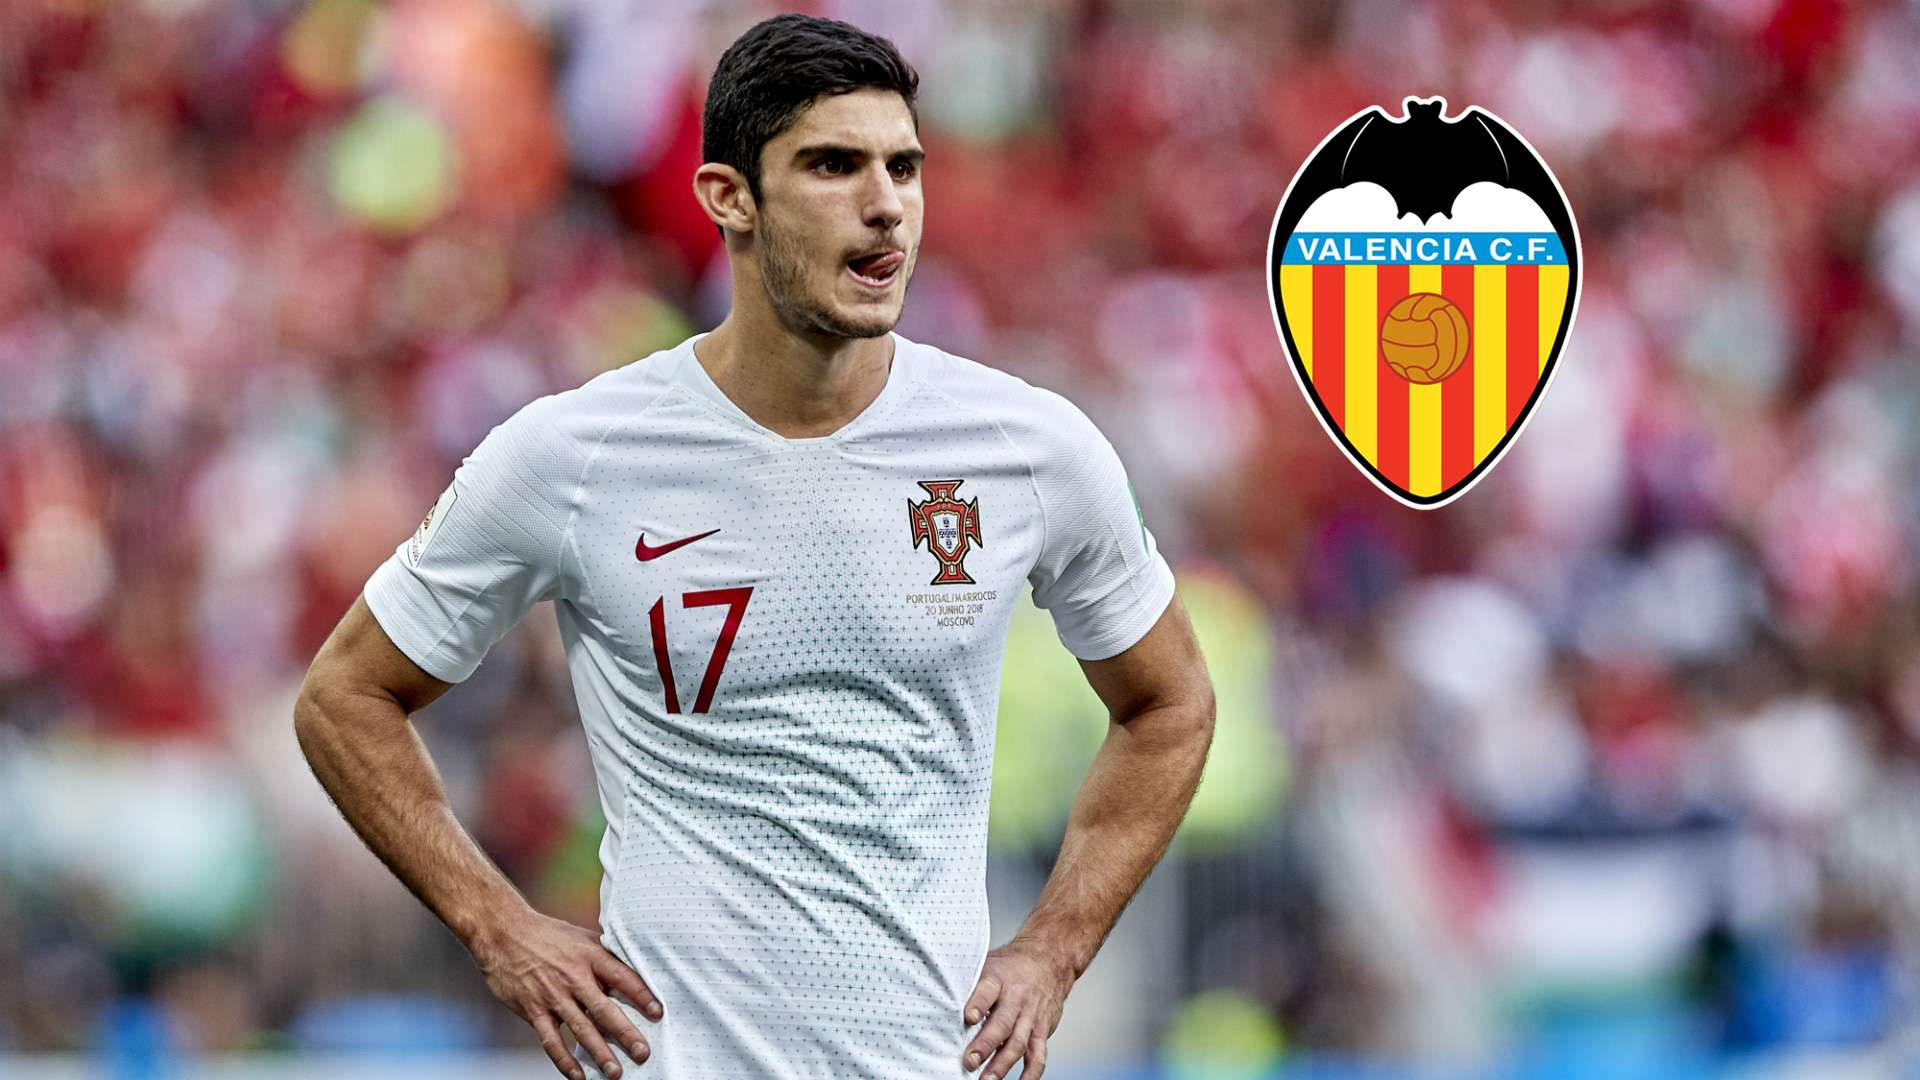 Gonzalo-Guedes-FC-Valencia